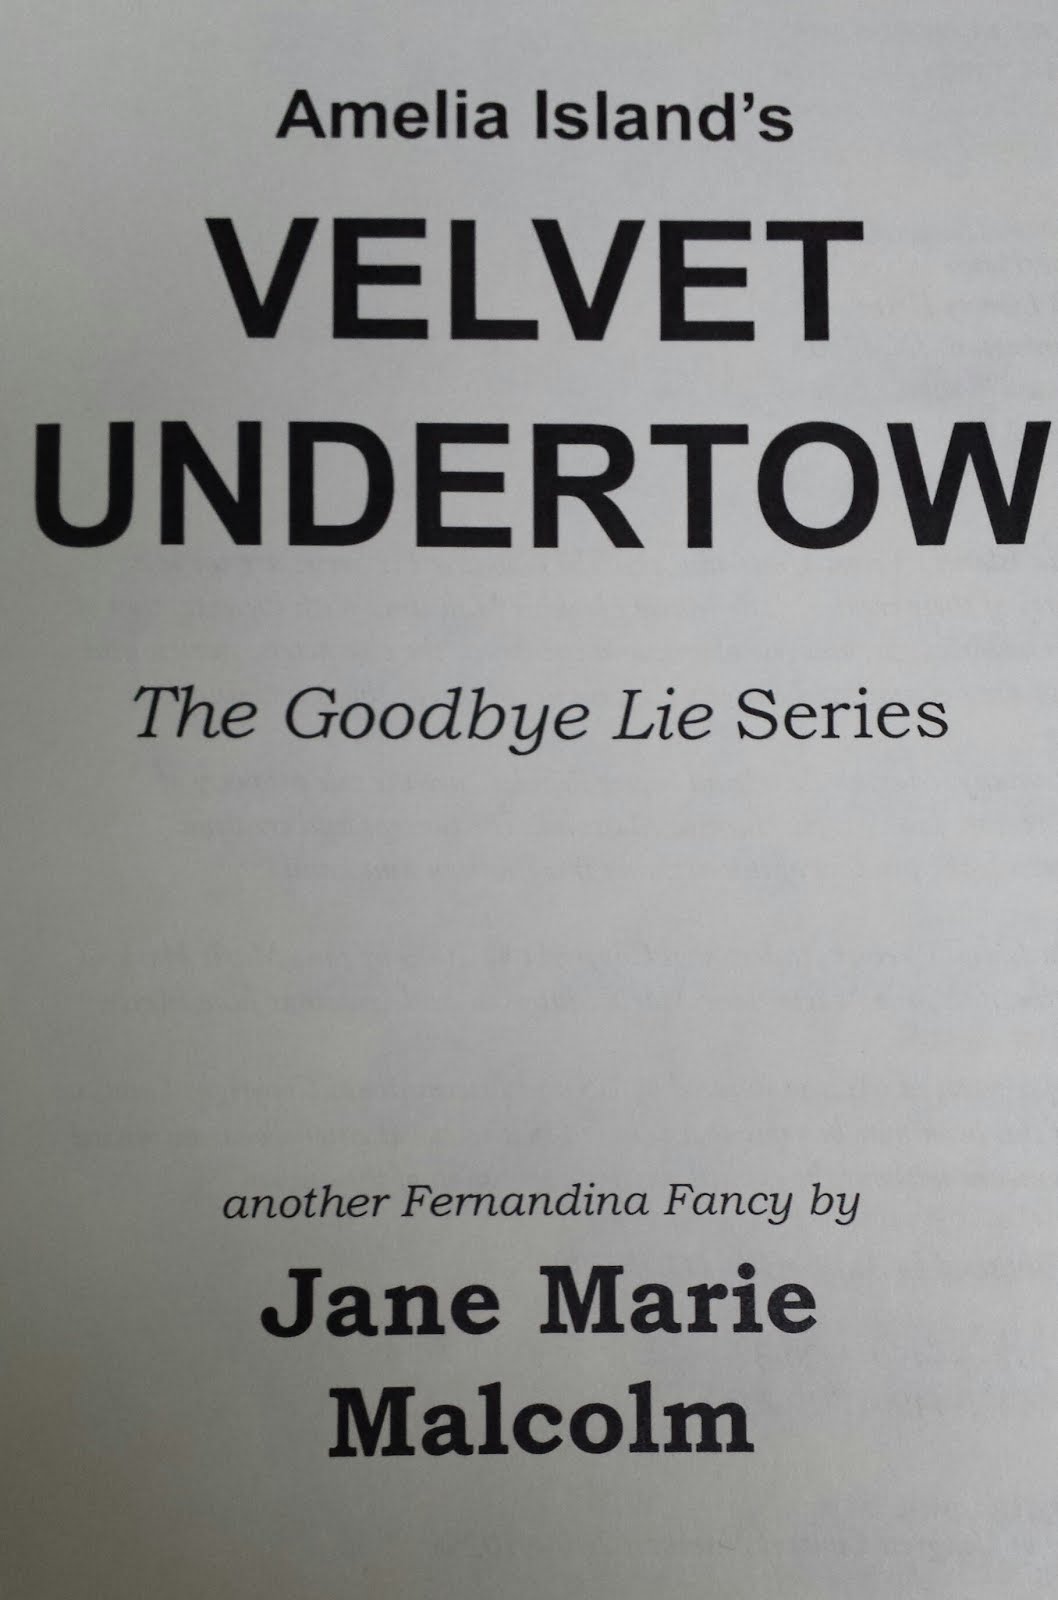 Click on the Title Page below to read the Opening Pages of Amelia Island's Velvet Undertow